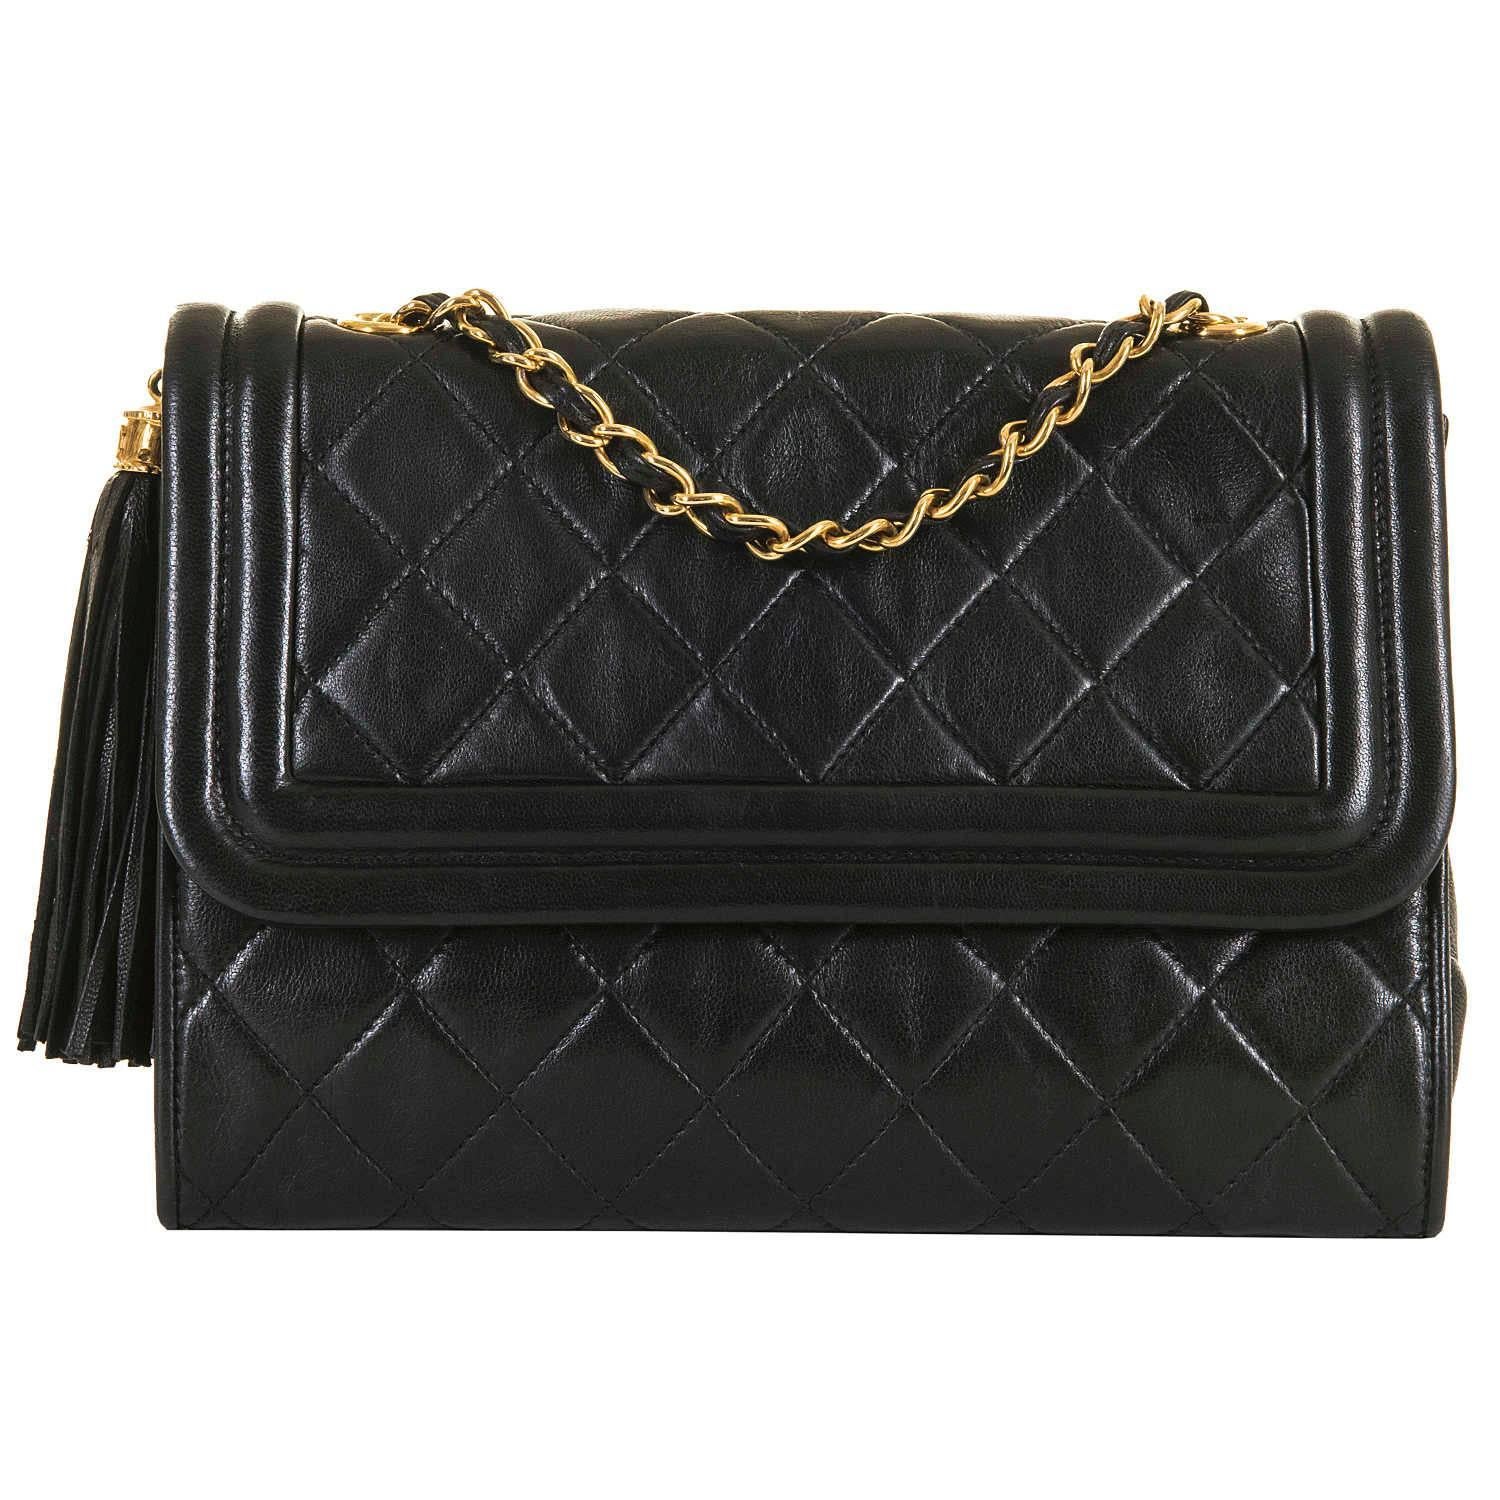 RARE Chanel 23cm Black Quilted Lambskin 'Pompom' Flap Bag with Gold Hardware